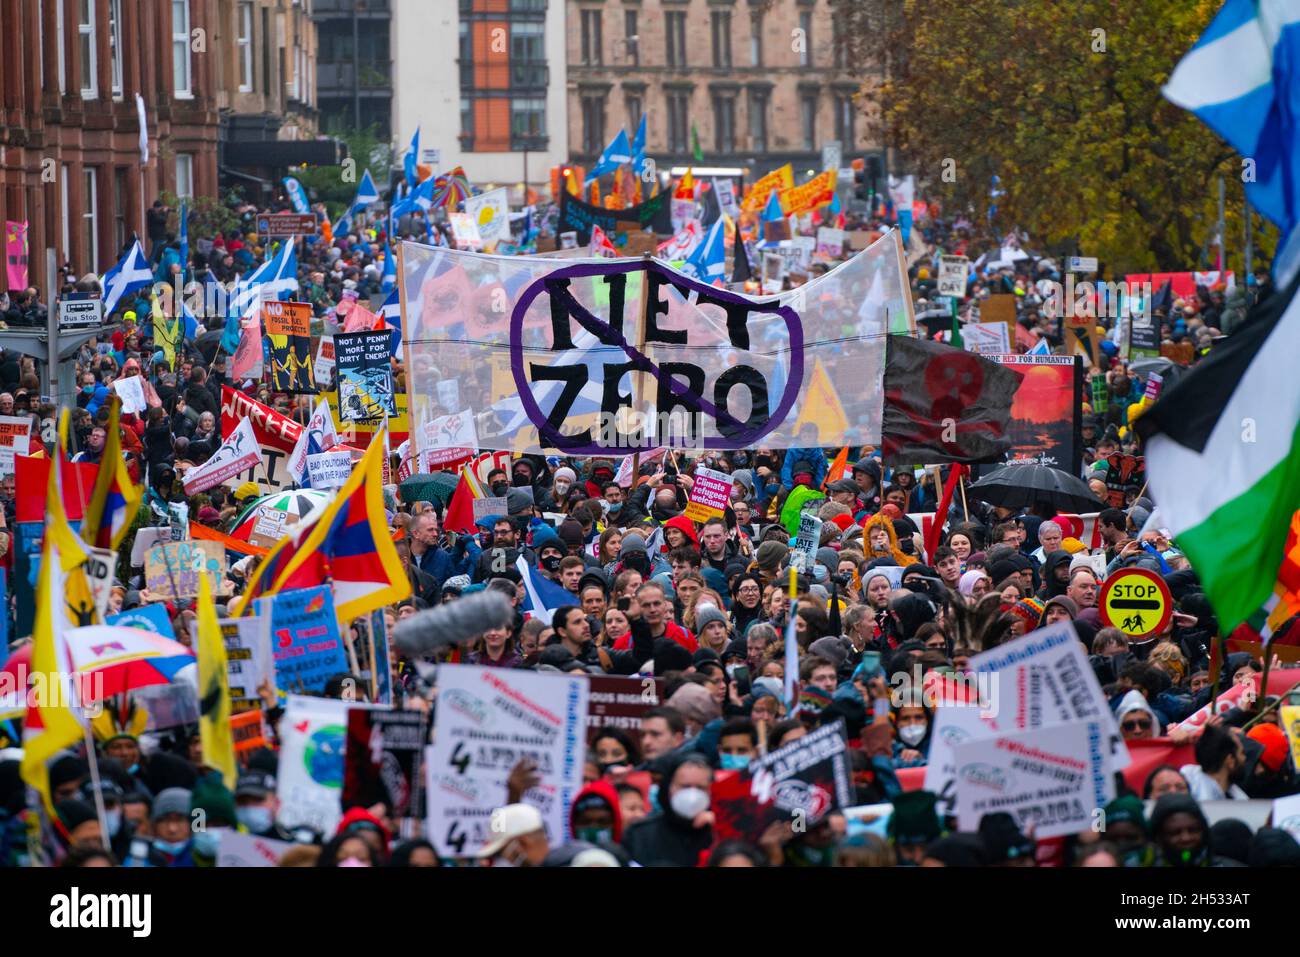 Glasgow, Scotland, UK. 6th November 2021. Climate Change Justice march taking place in central Glasgow. . Pic;  Iain Masterton/Alamy Live News. Stock Photo